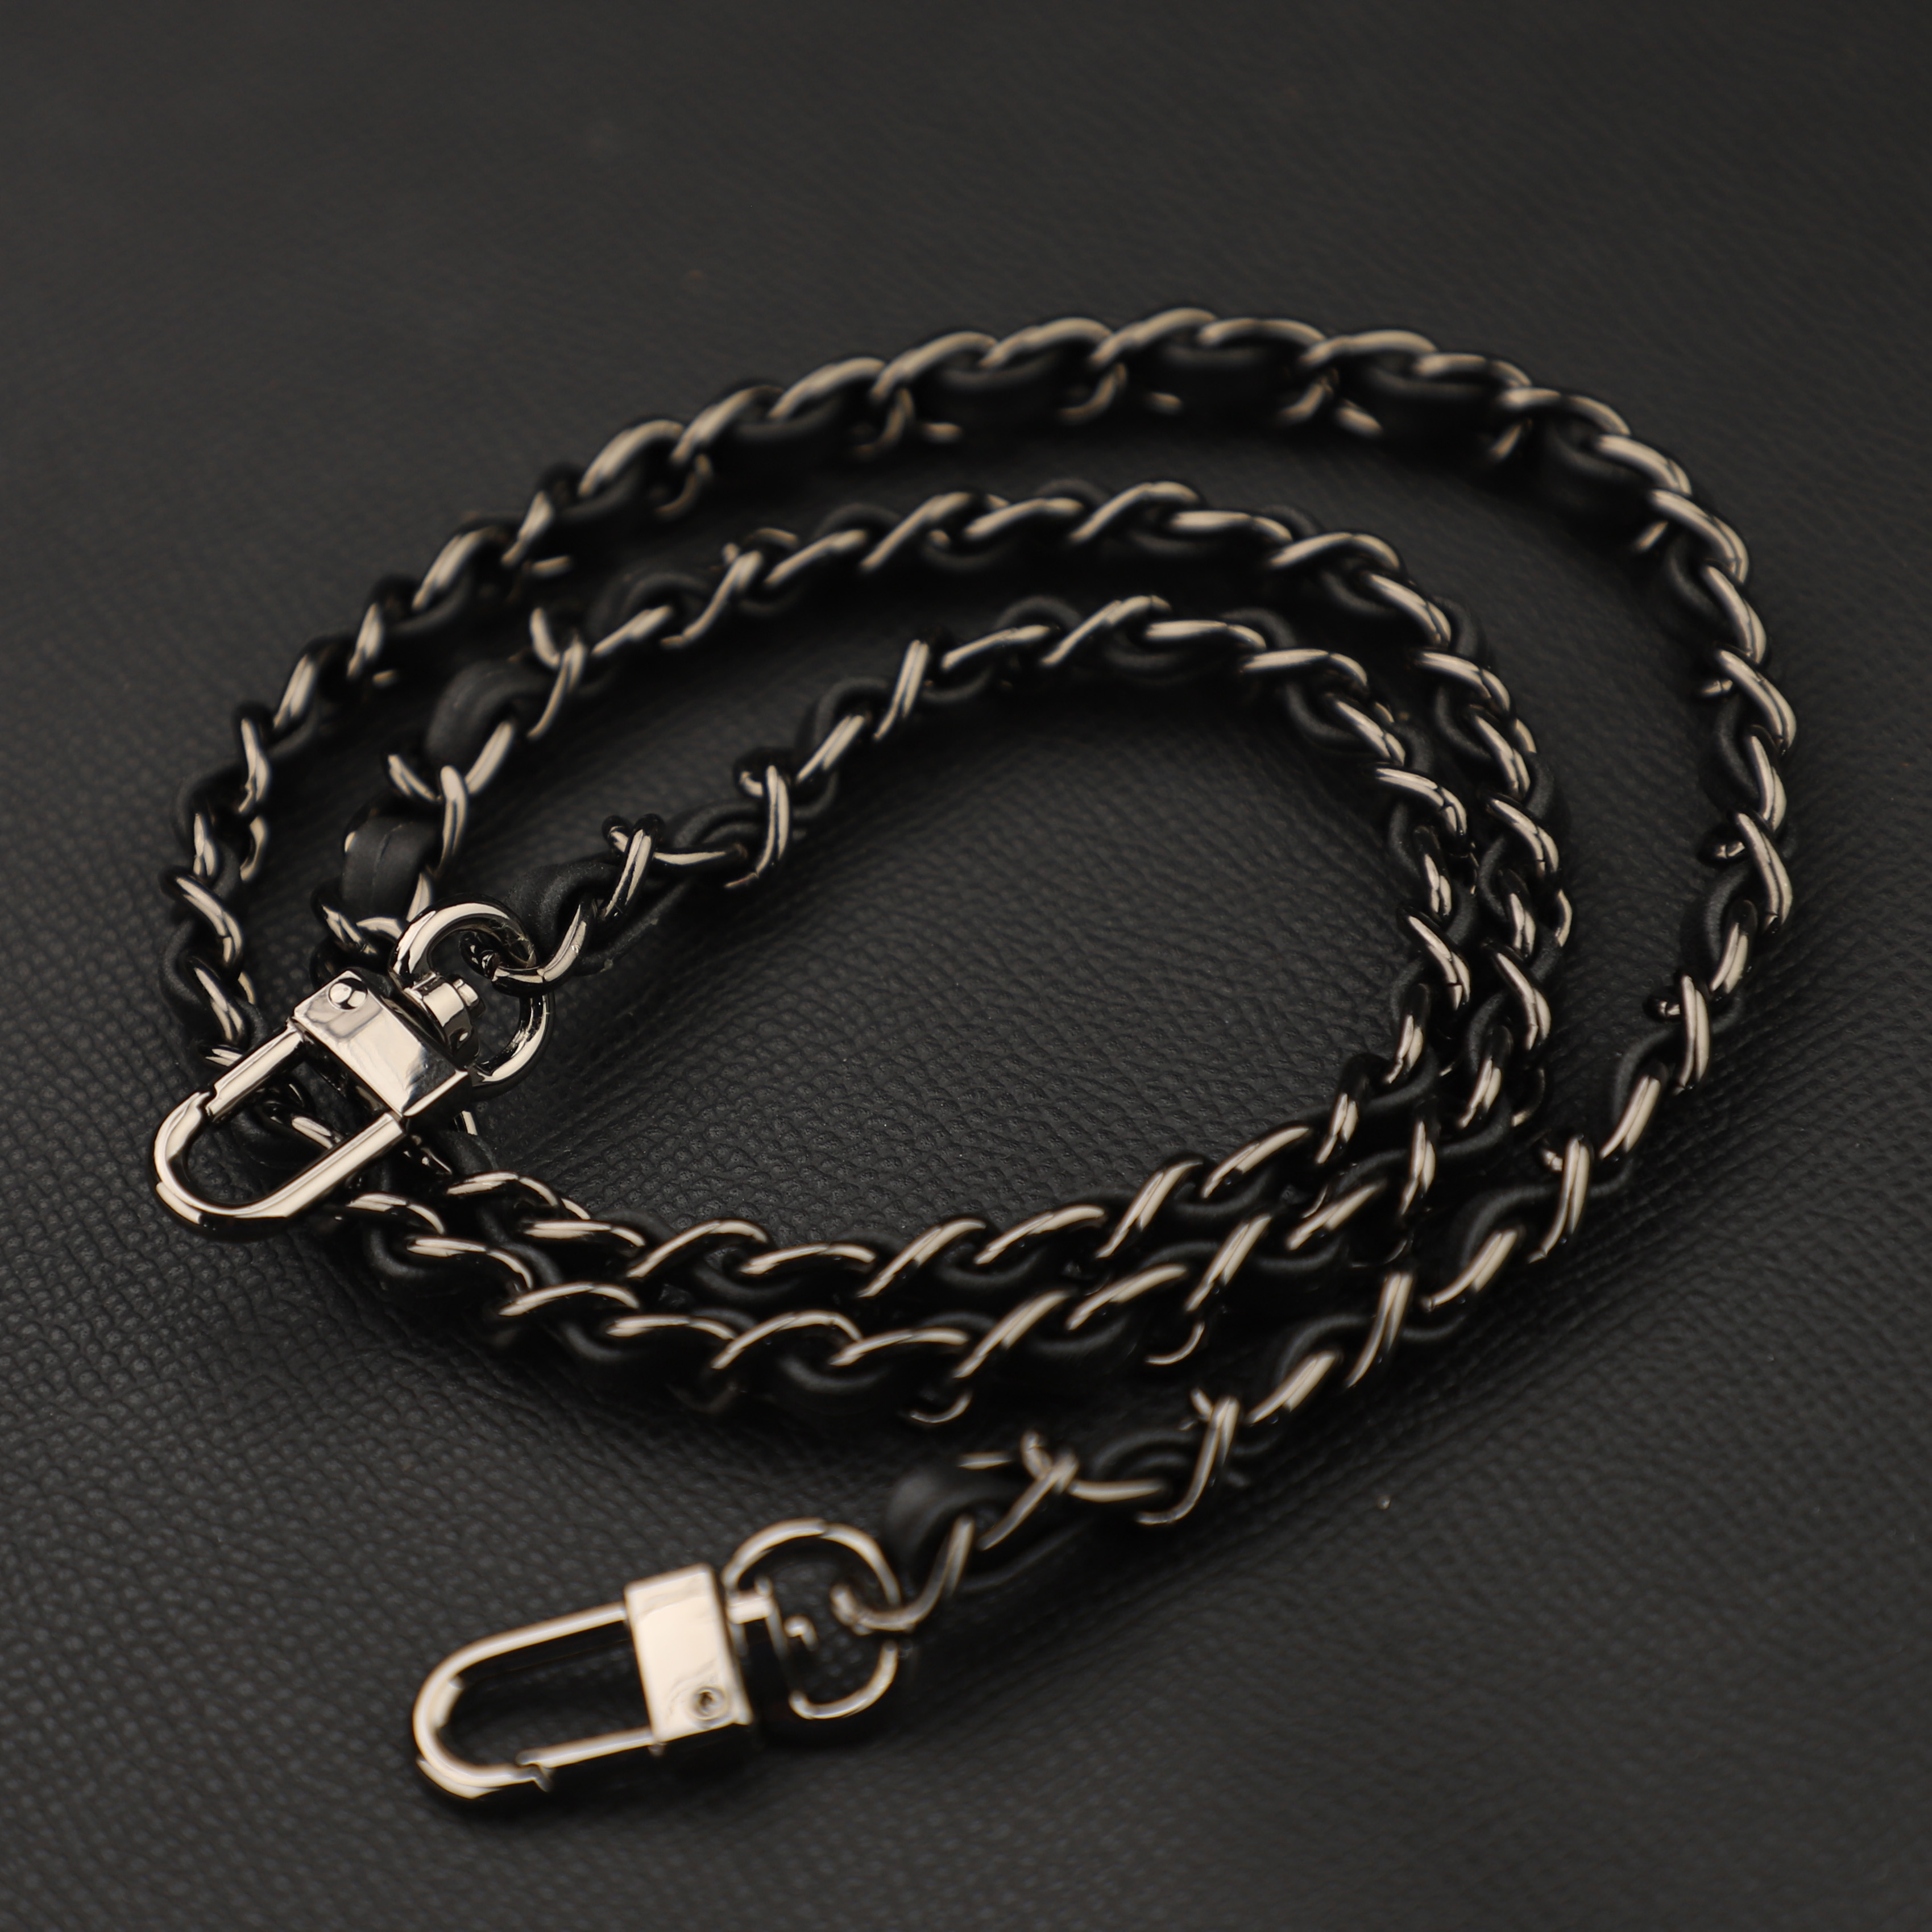 Handmade genuine swift Leather Chain Strap , Replacement Strap, Select Length, All Colours for Leather & Chain Availab